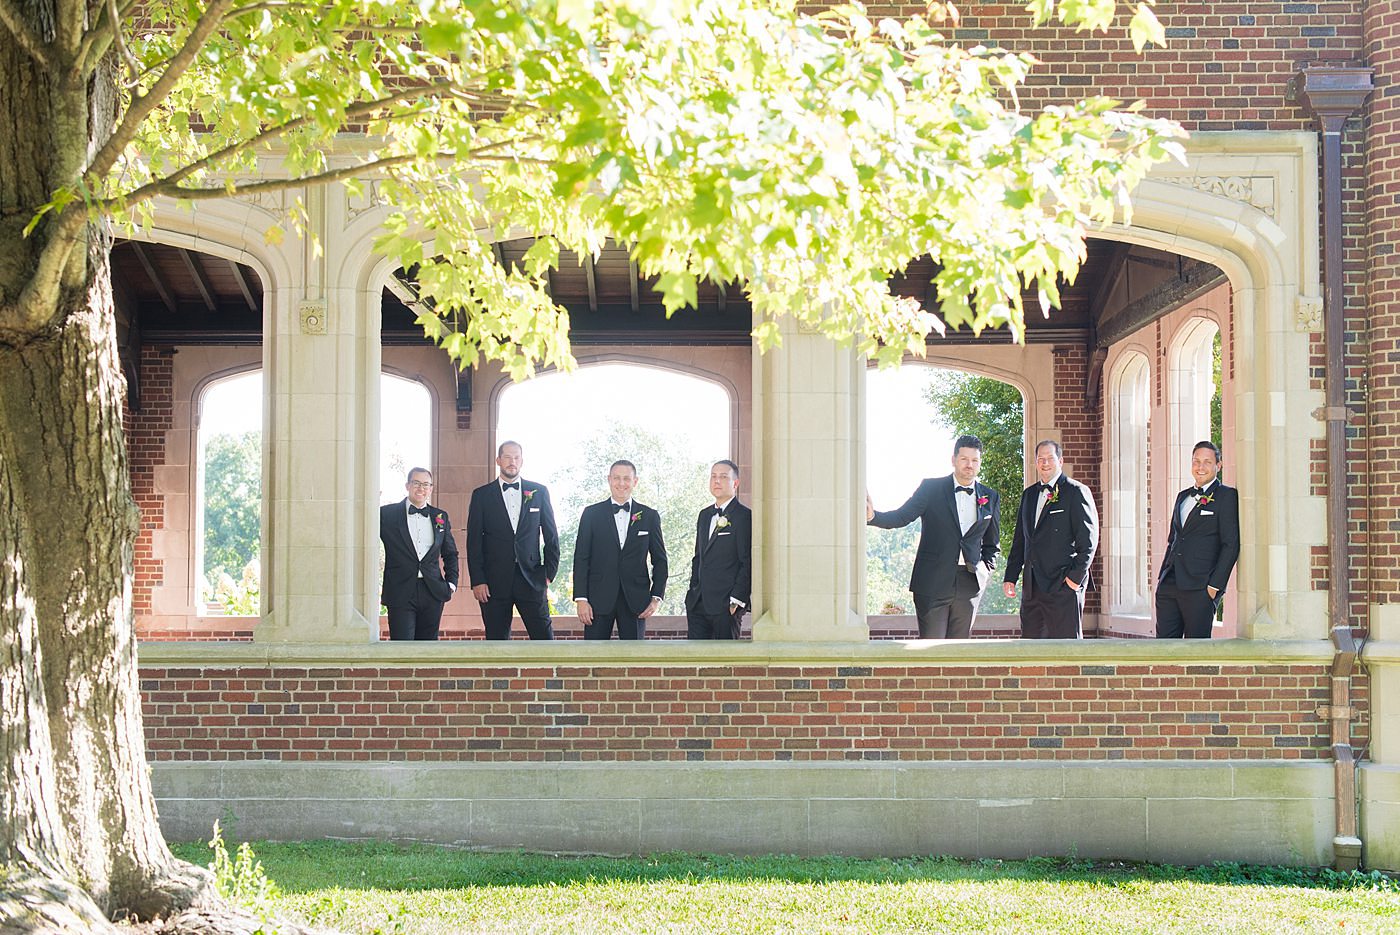 Photos by Mikkel Paige Photography at Waveny House wedding venue in New Canaan, Connecticut. This beautiful venue has an outdoor garden for the ceremony and indoor historic home for the reception. The groom and groomsmen wore black tuxedos with rose boutonnieres. #mikkelpaige #wavenyhouse #wavenyhousewedding #connecticutweddingvenue #connecticutweddingphotographer #weddingparty #groomsmen #blacktuxedos